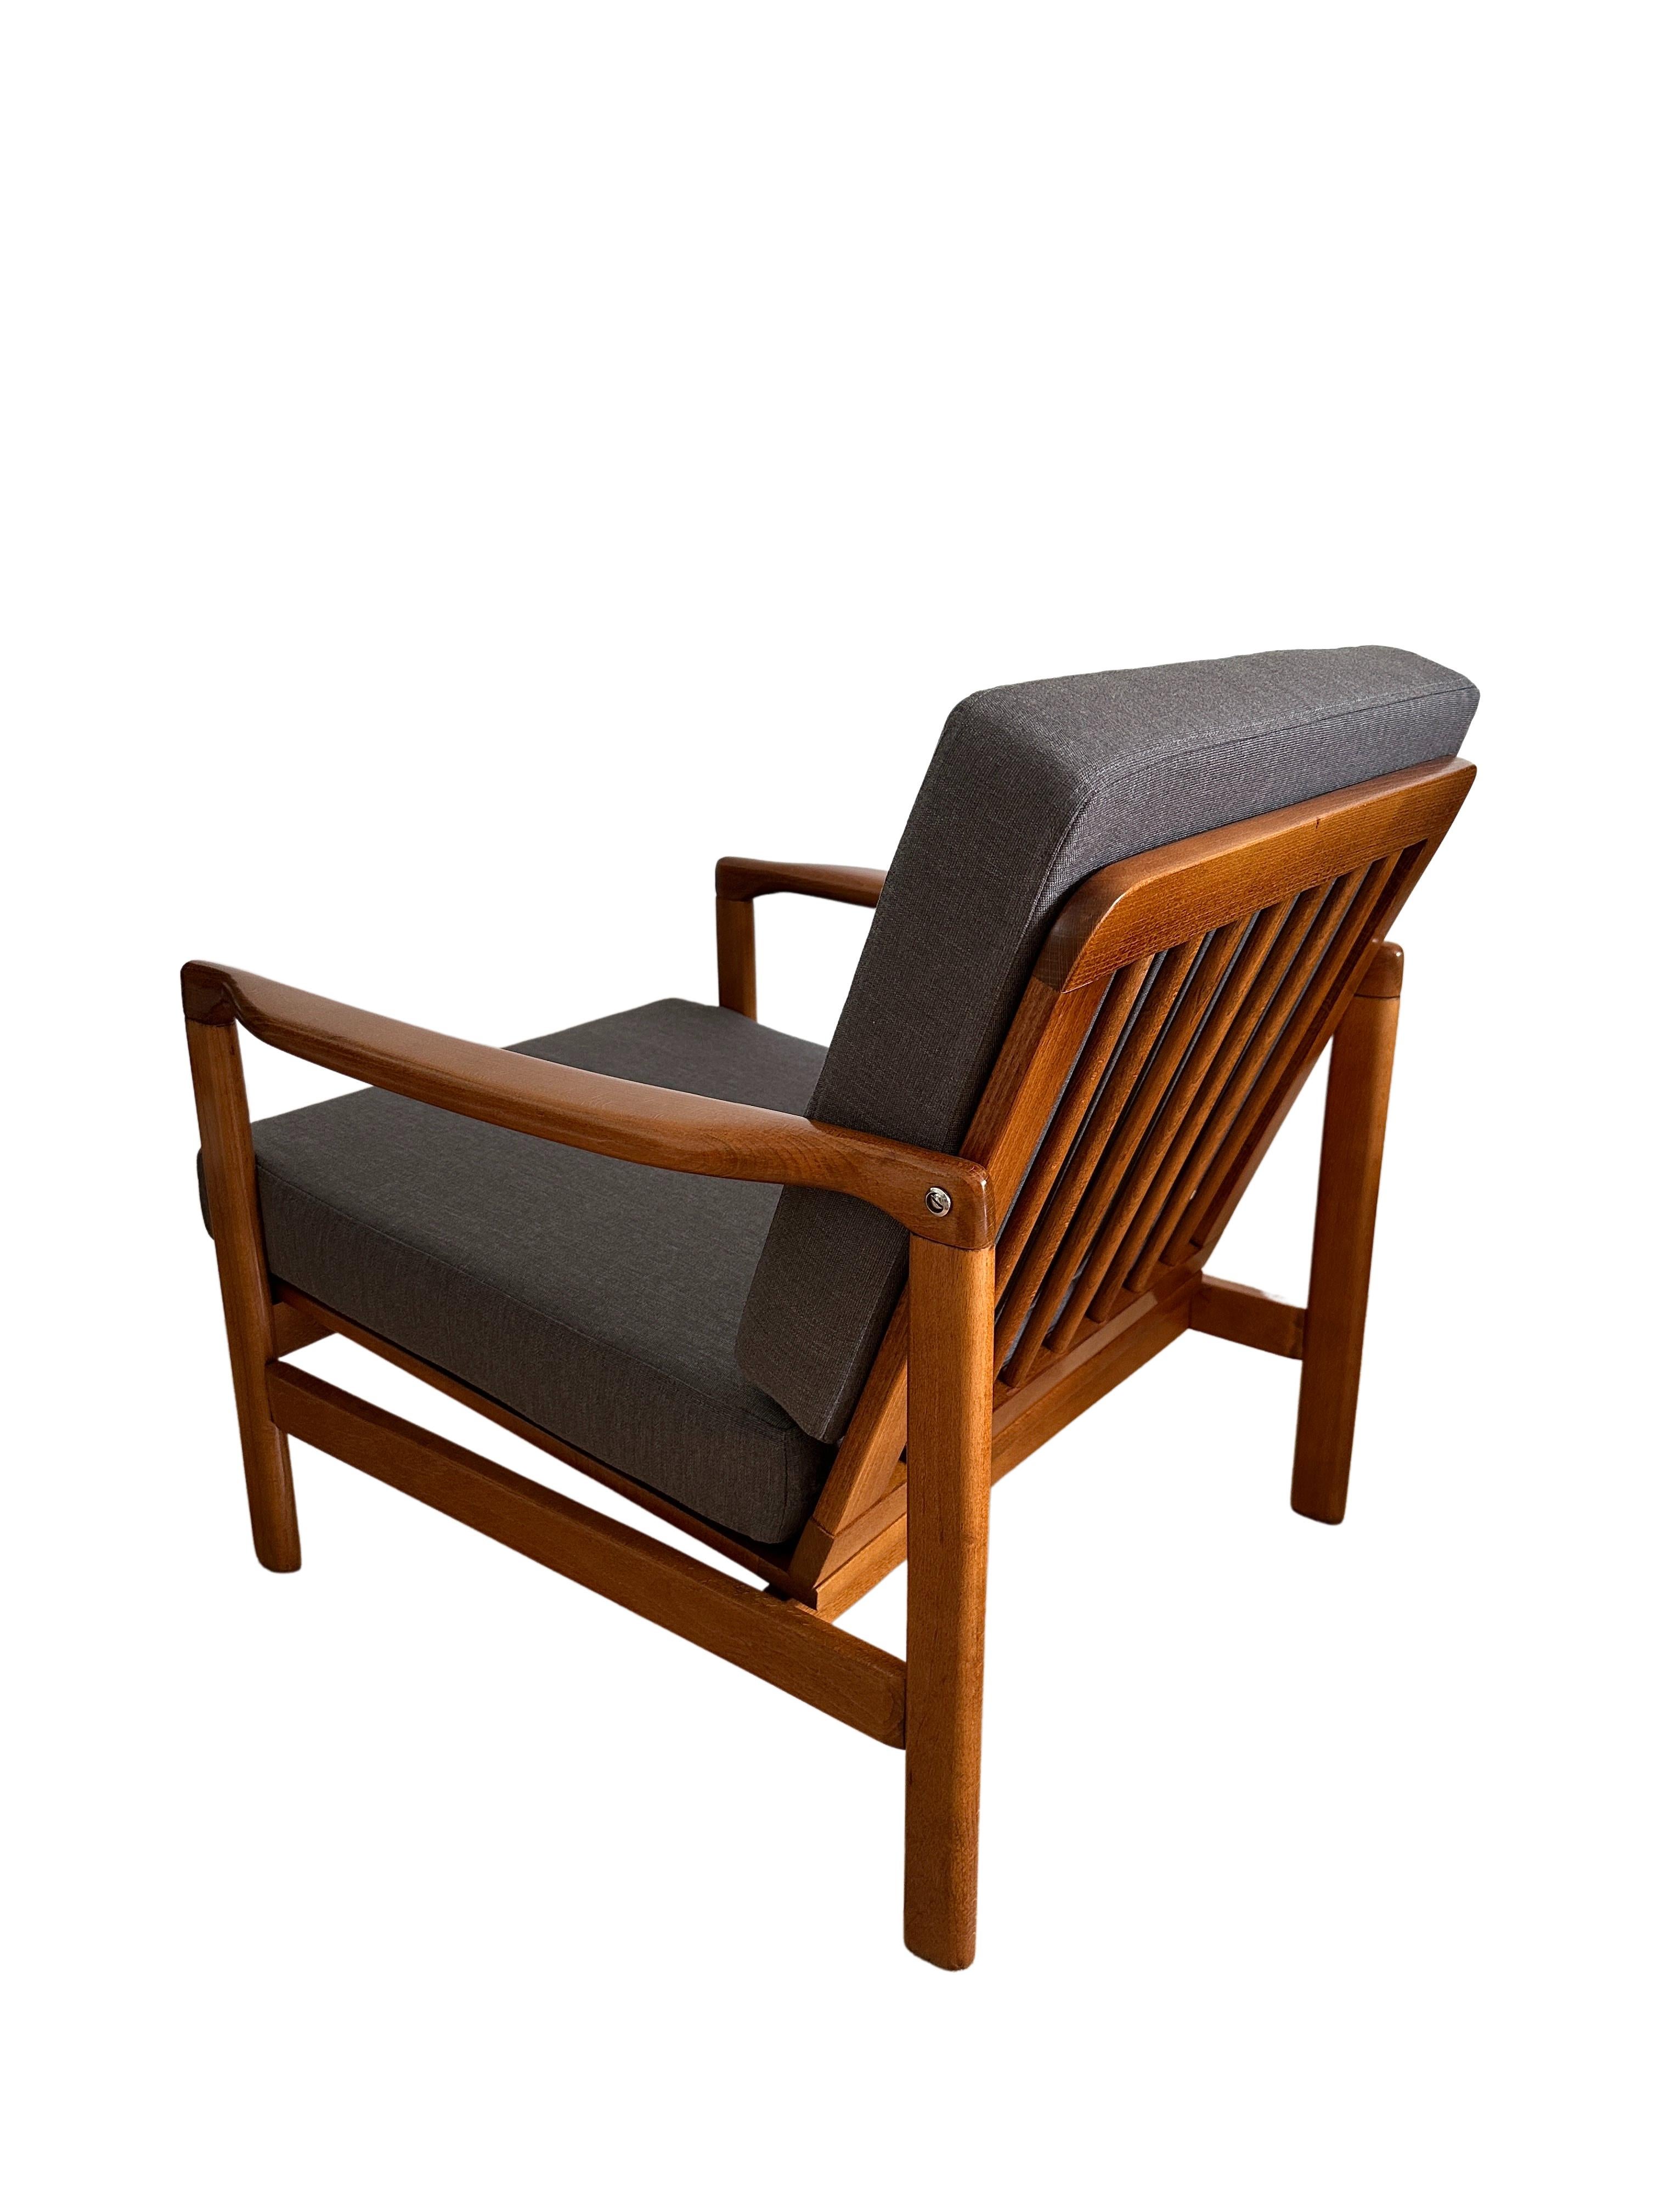 Mid-Century Modern Mid-Century Armchair, Wood and Grey Kvadrat Upholstery, Europe, 1960s For Sale